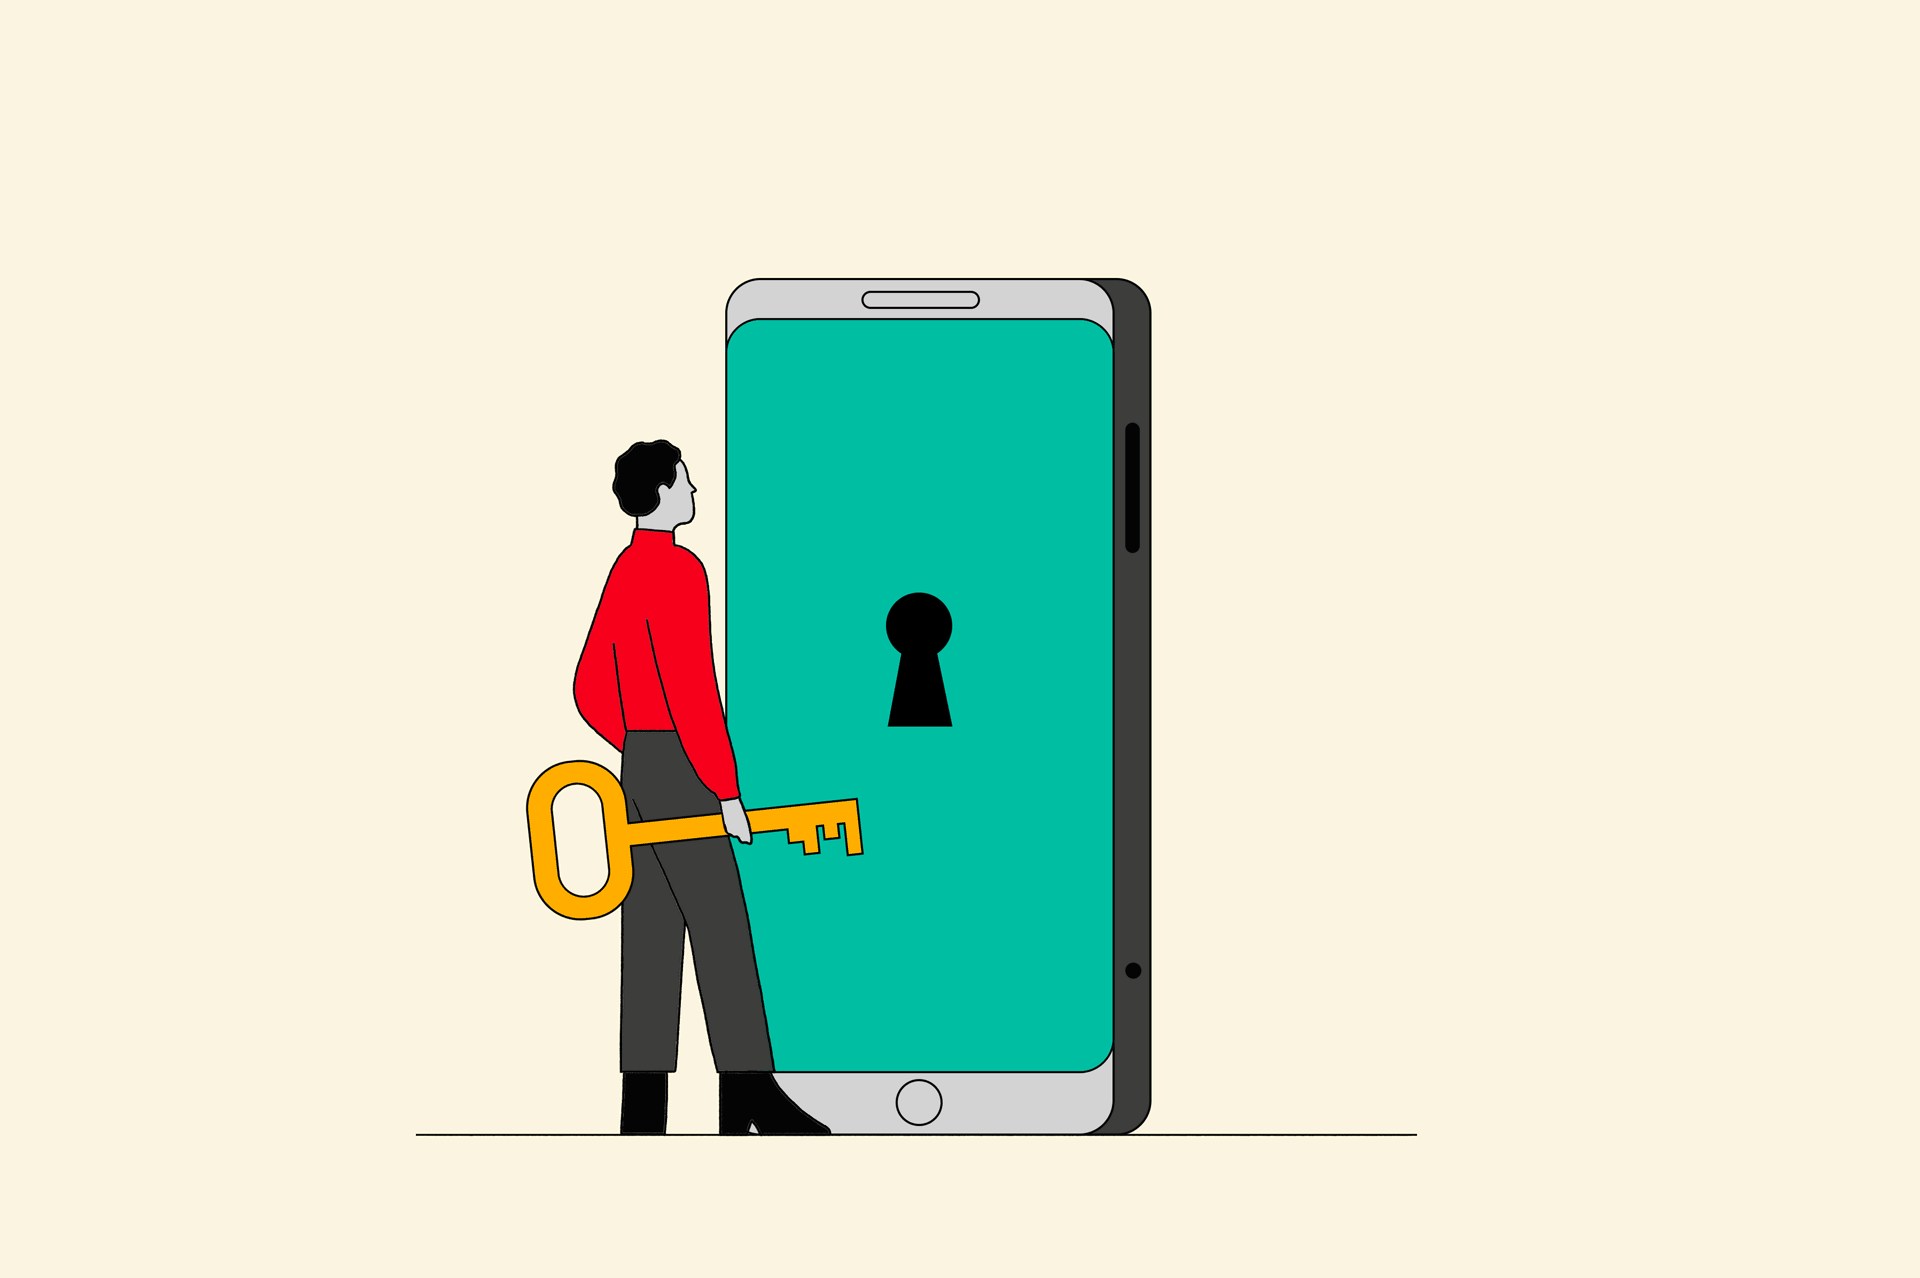 A cartoon graphic of a person with a giant key unlocks a keyhole displayed on a large phone screen.